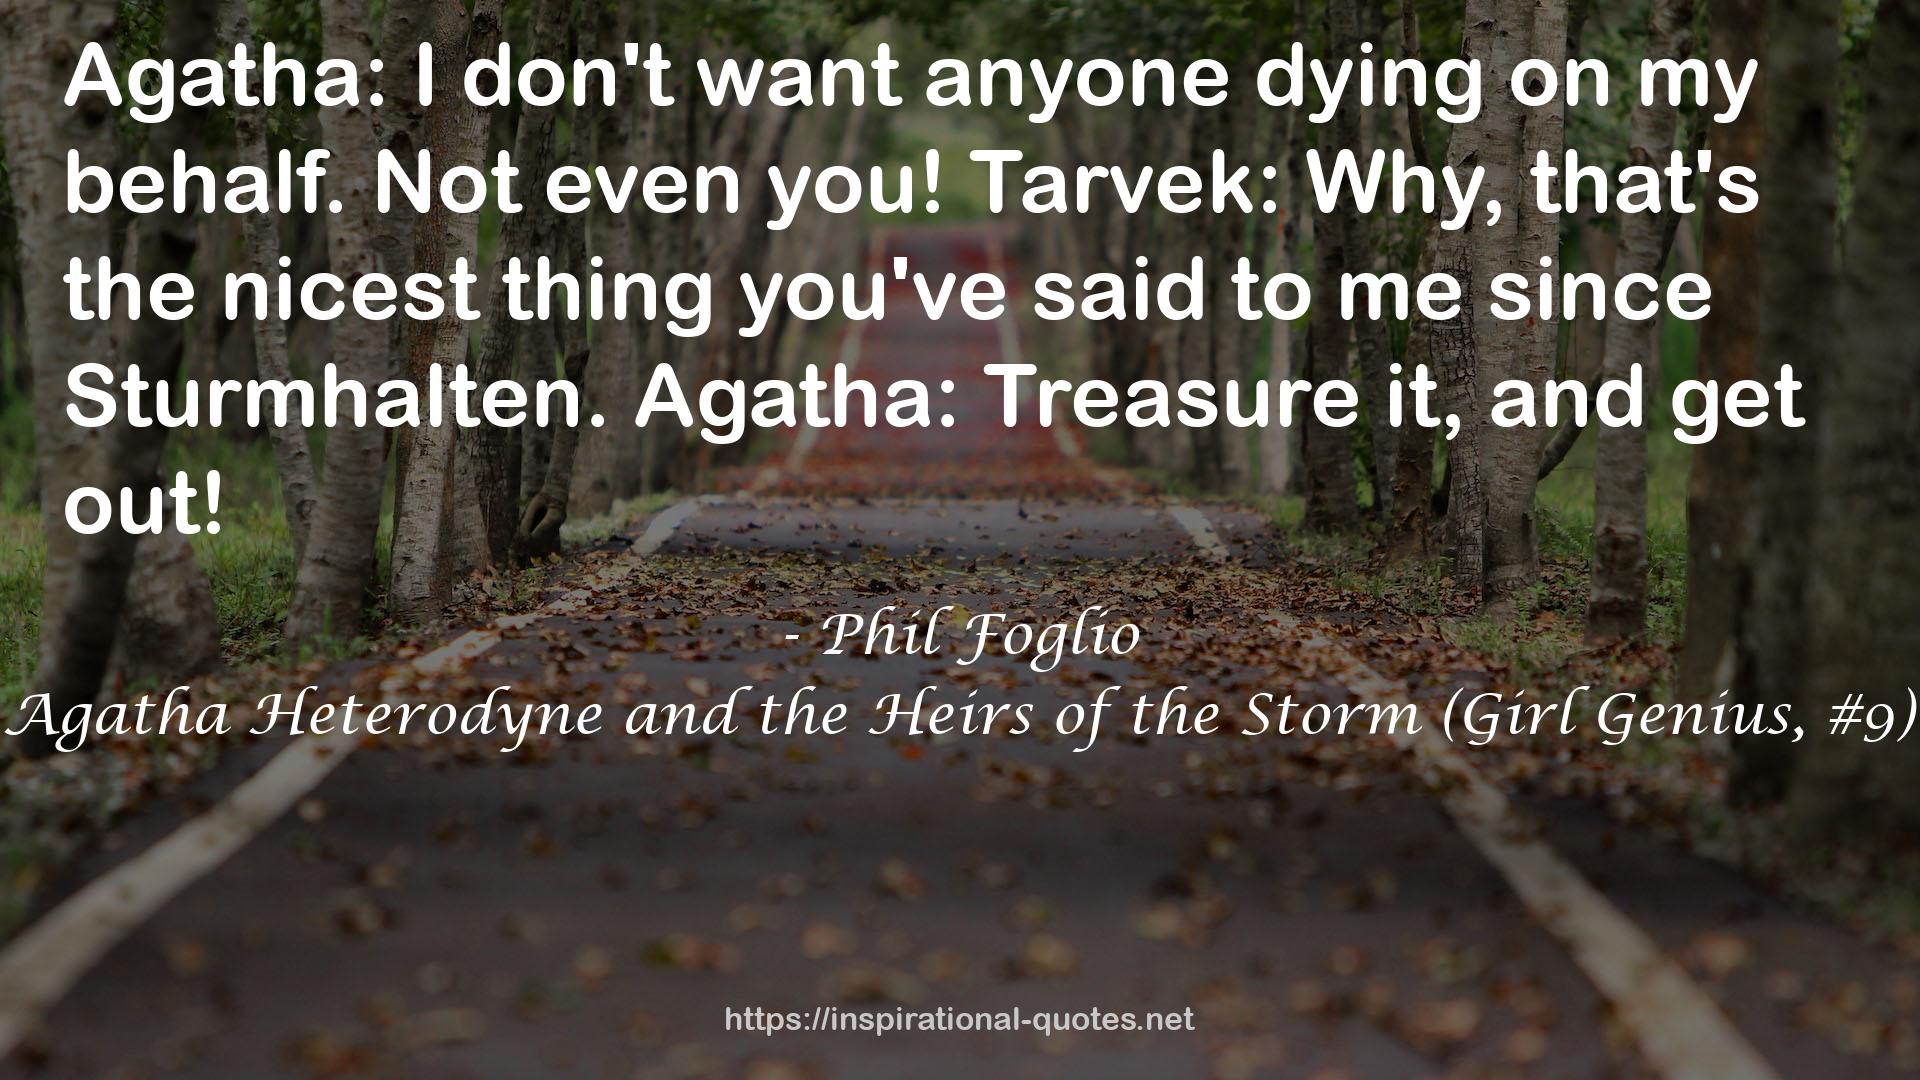 Agatha Heterodyne and the Heirs of the Storm (Girl Genius, #9) QUOTES